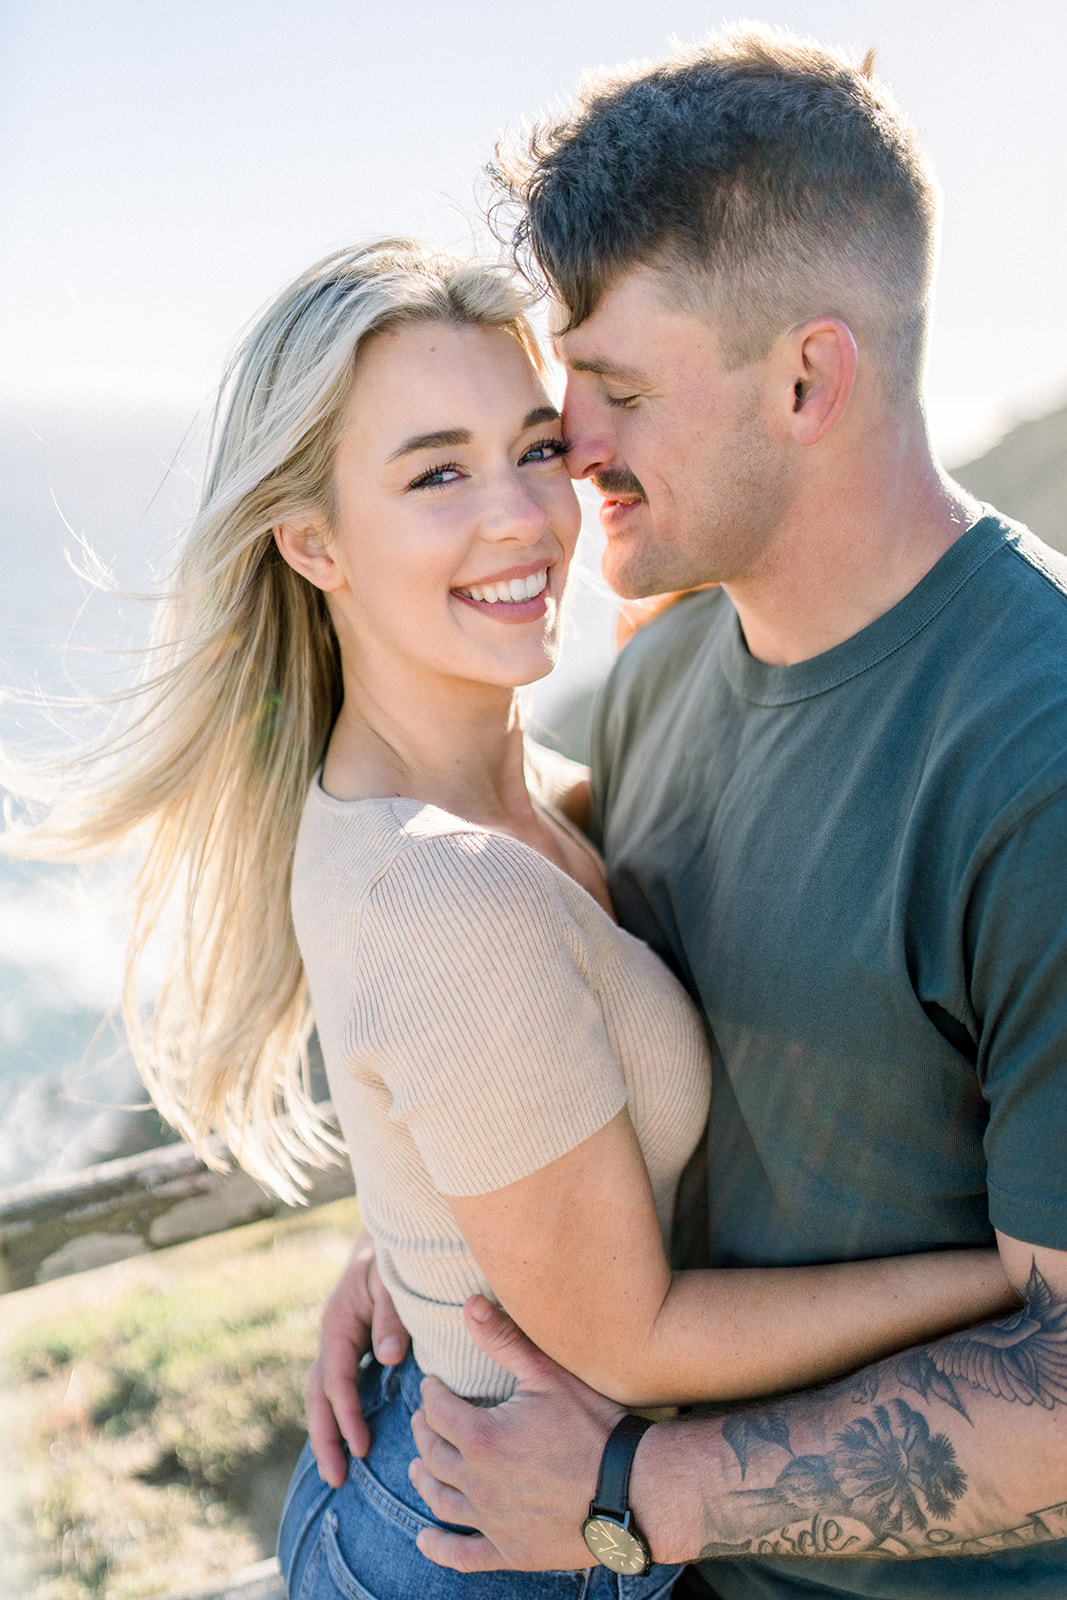 Casual breezy Coastal Point Reyes, CA engagement session Photographer